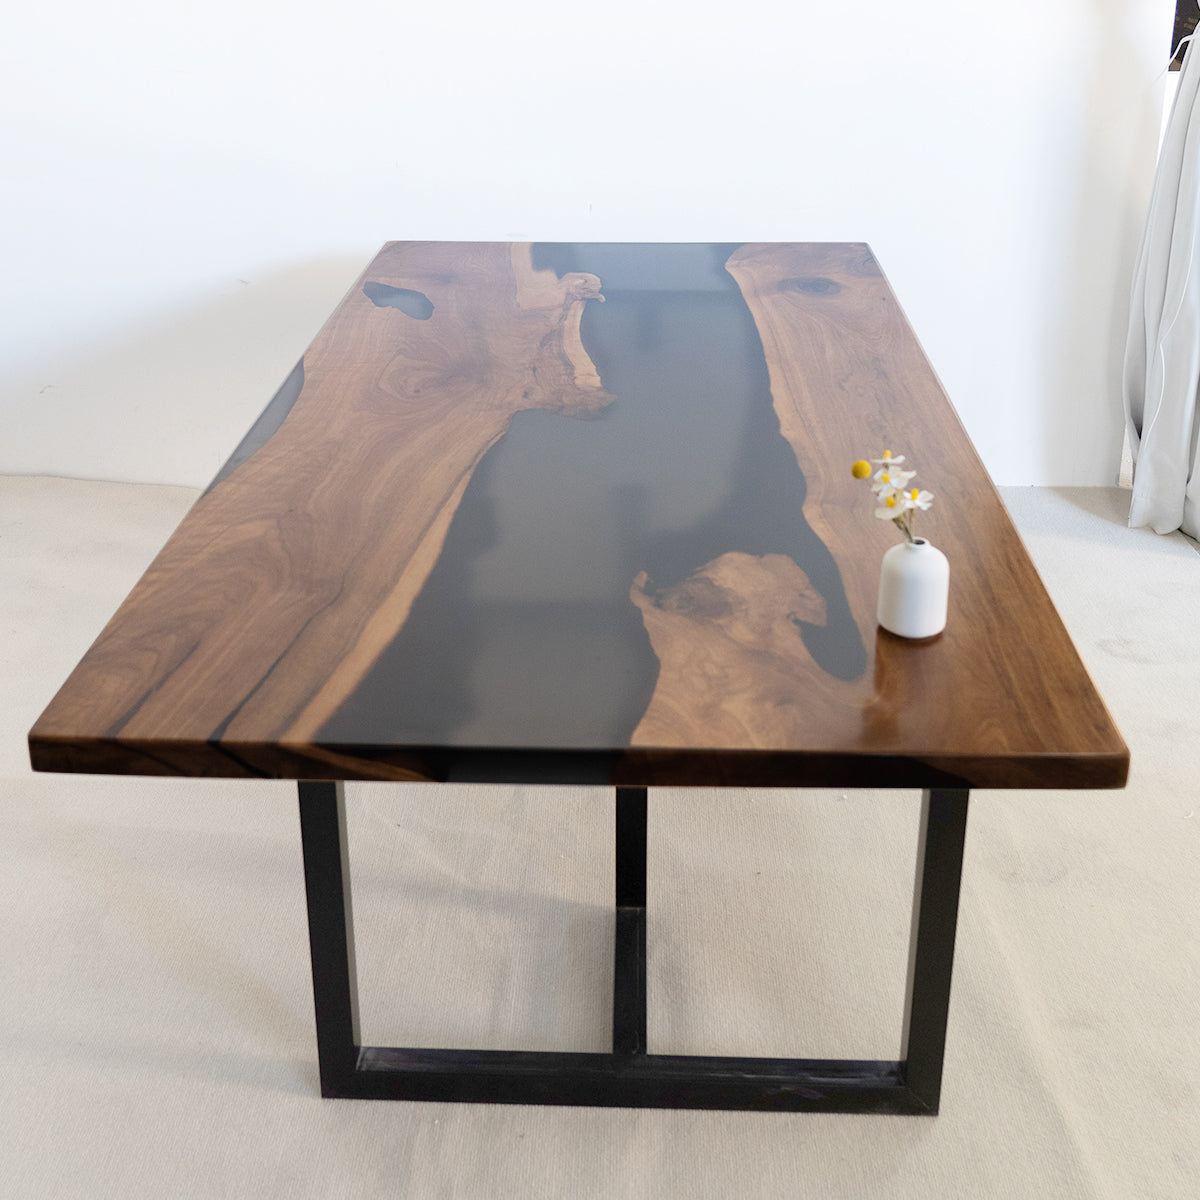 Kazanahome Real Shots of Customer Customized Epoxy Table Pictures 